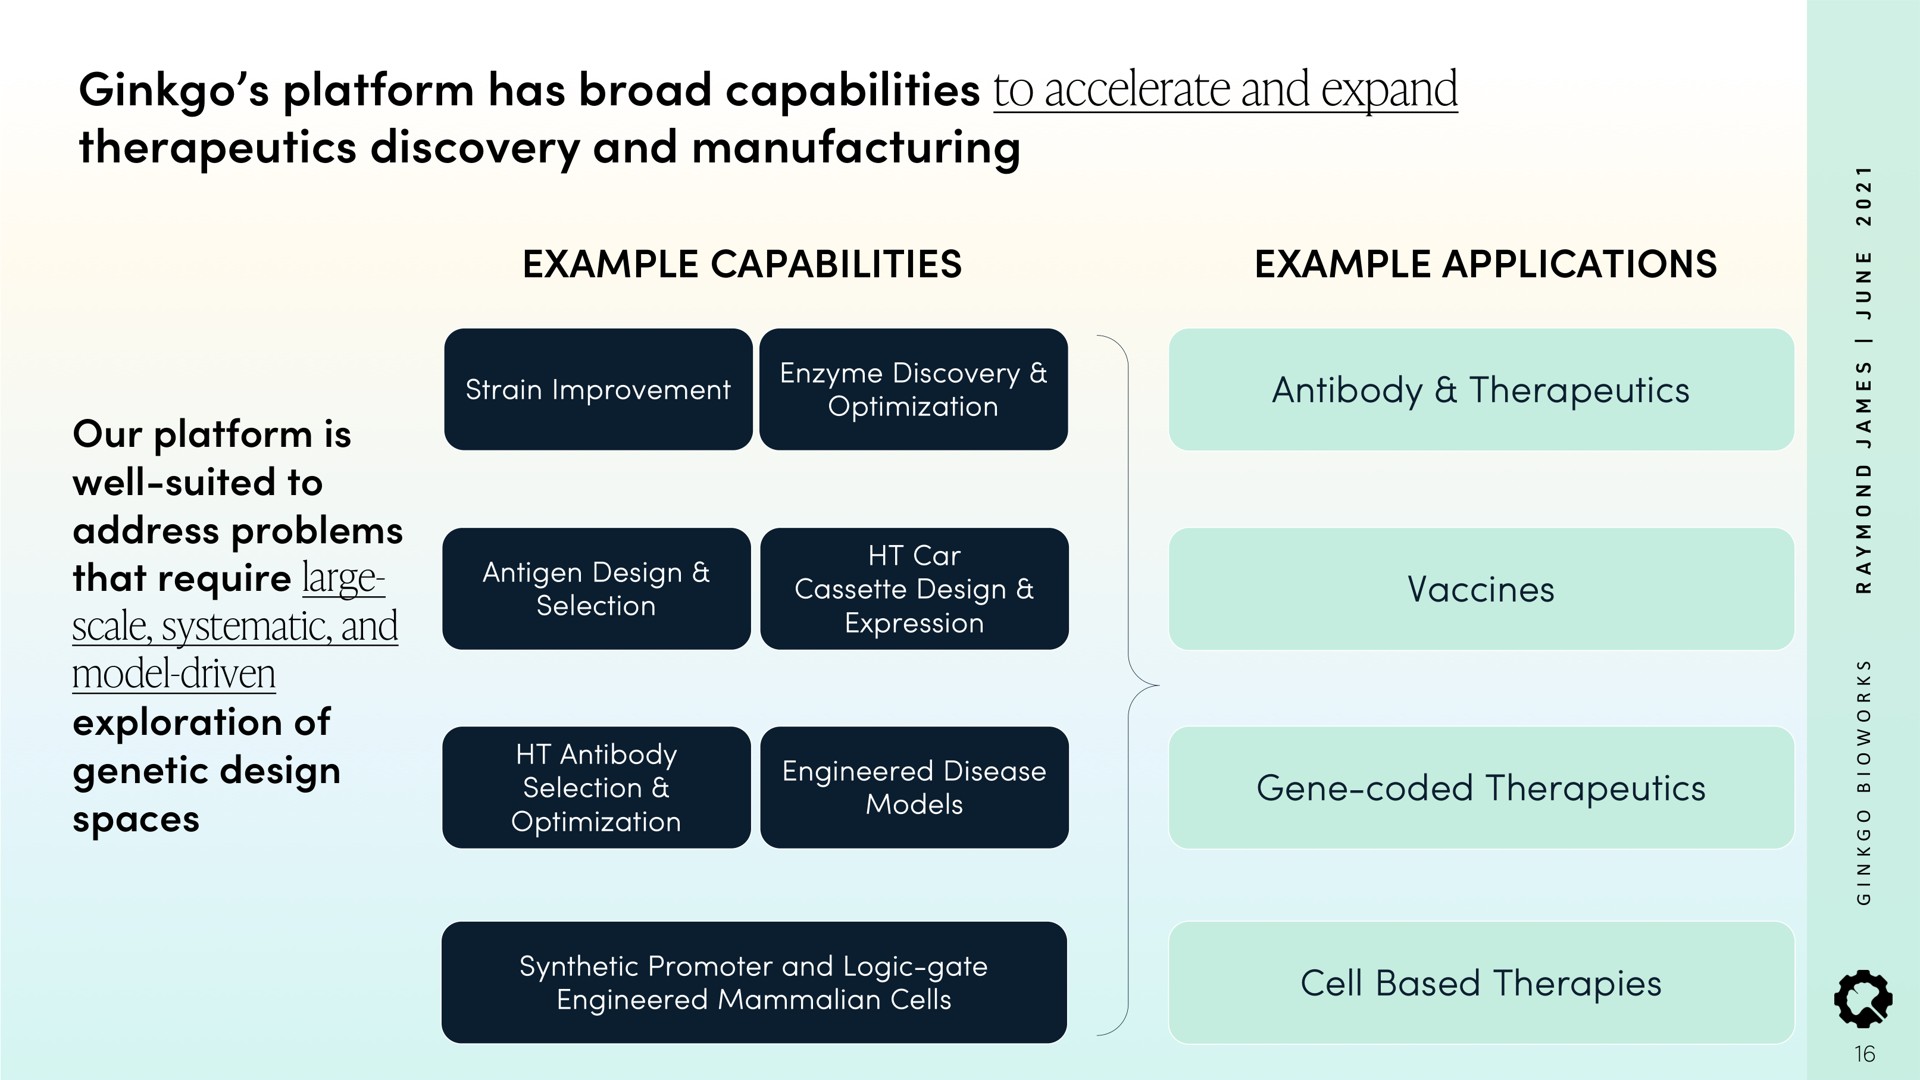 ginkgo platform has broad capabilities to accelerate and expand therapeutics discovery and manufacturing | Ginkgo